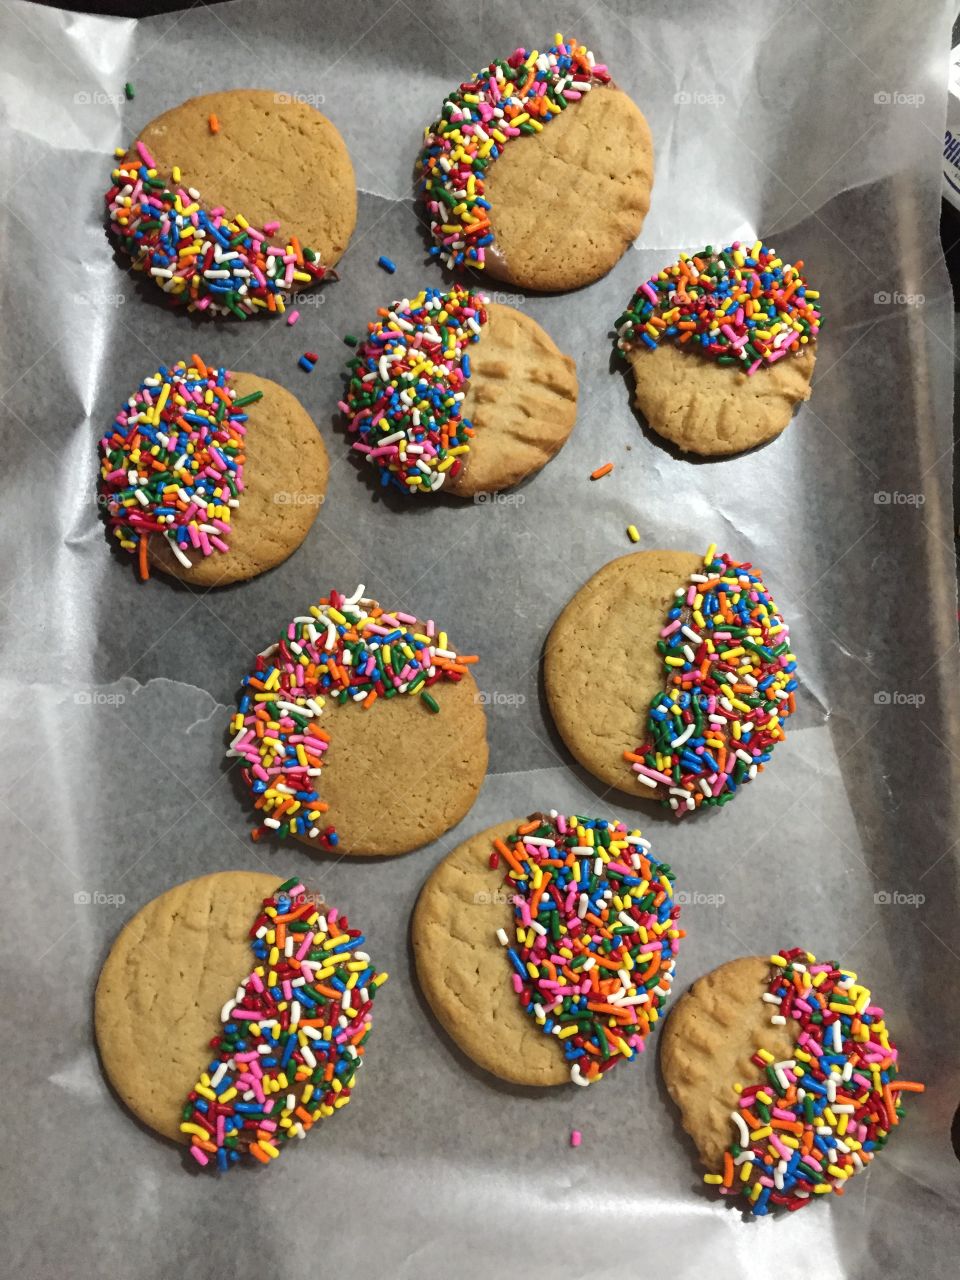 Peanut butter cookies dipped in melted chocolate and sprinkles